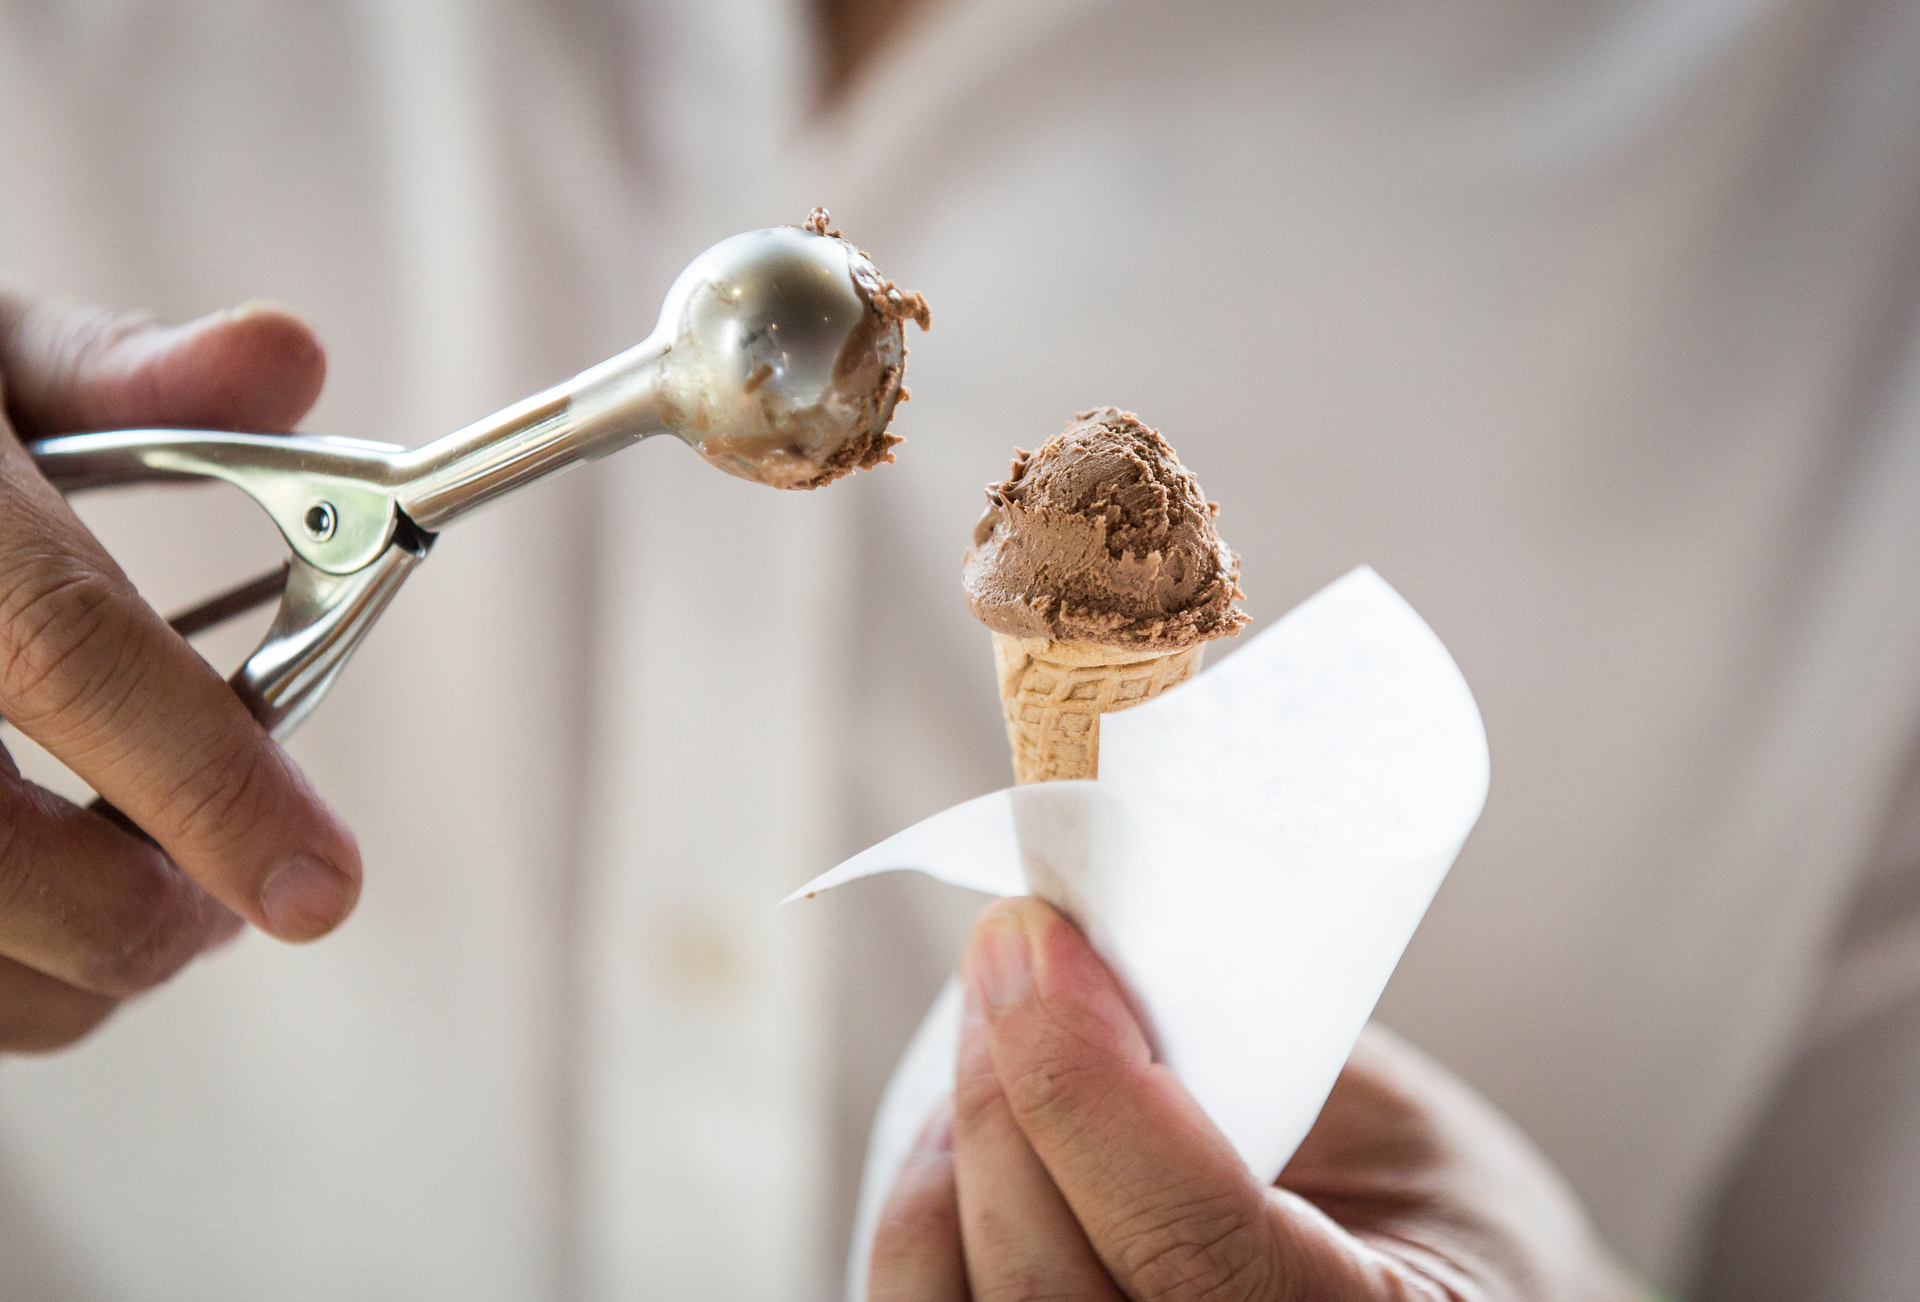 One of the treats at TED2015? Miniature ice cream cones. Photo: Ryan Lash/TED